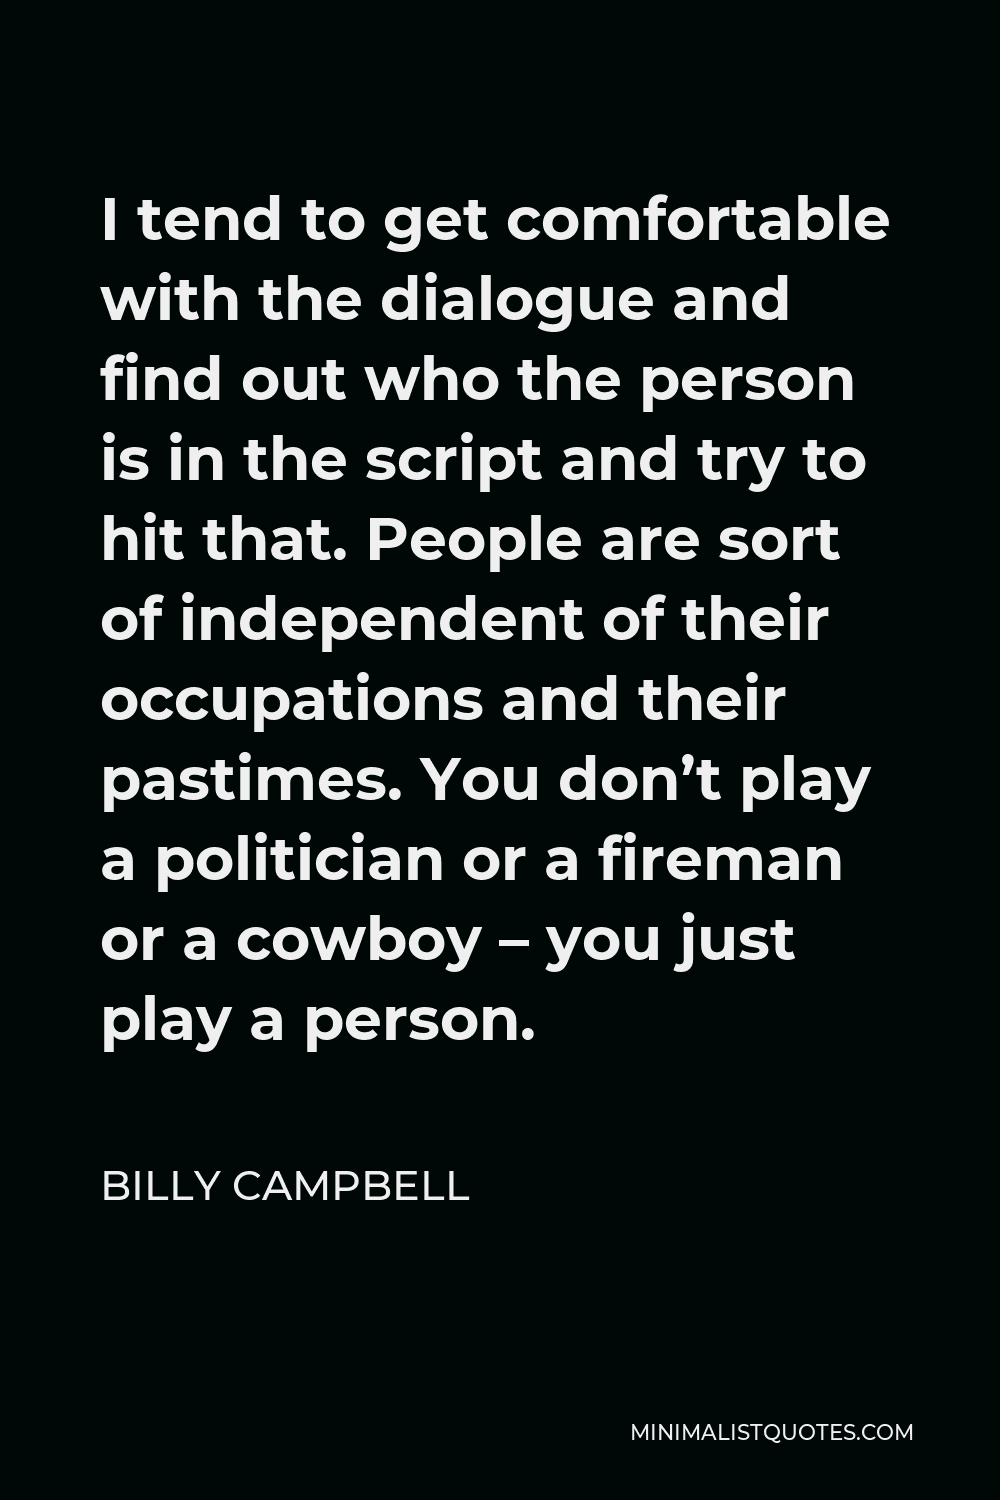 Billy Campbell Quote - I tend to get comfortable with the dialogue and find out who the person is in the script and try to hit that. People are sort of independent of their occupations and their pastimes. You don’t play a politician or a fireman or a cowboy – you just play a person.